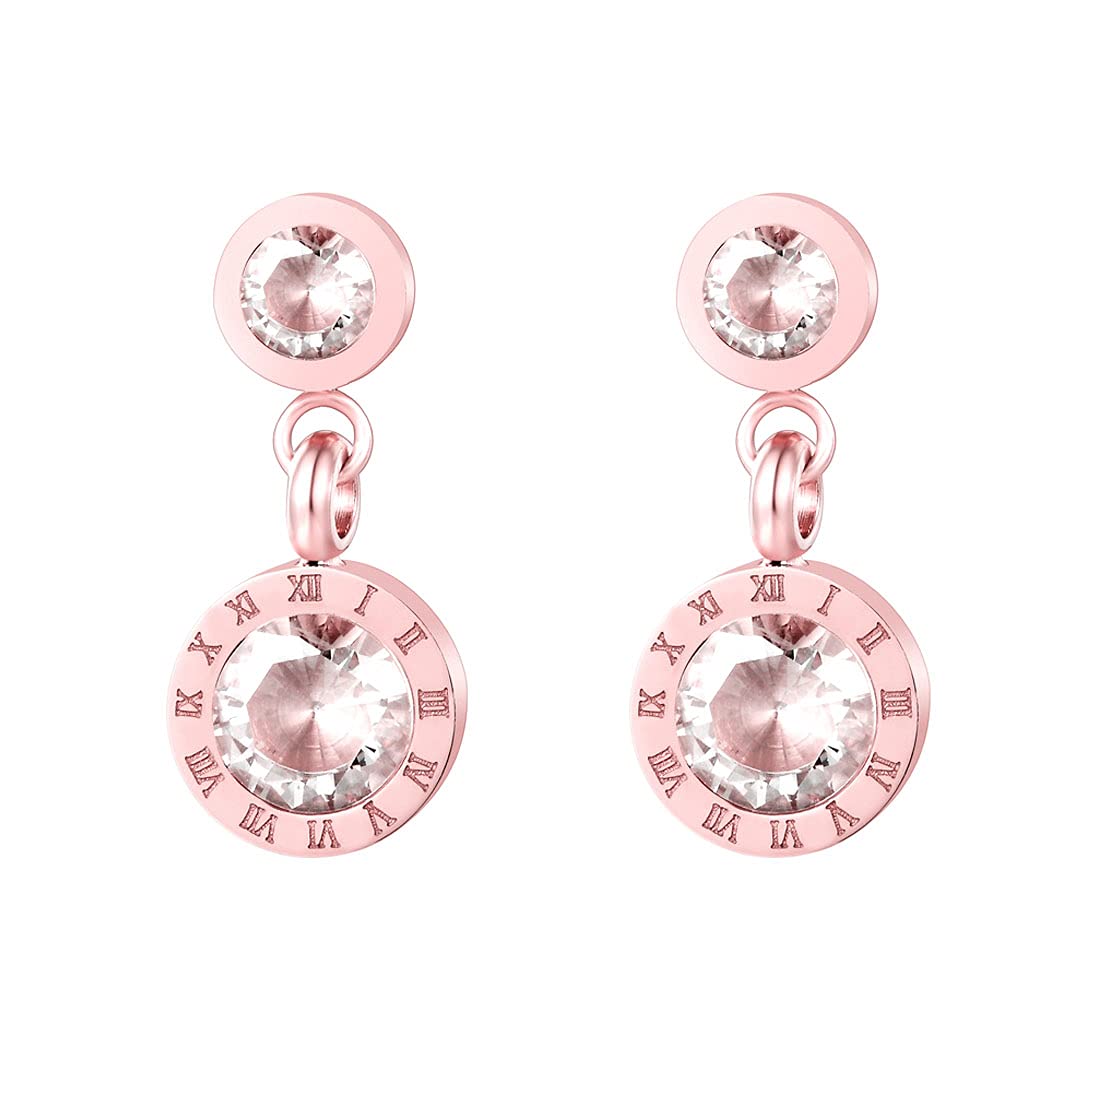 Yellow Chimes Crystal Earrings for Women Western Style Rose Gold Plated Stainless Steel Roman Numericals Engraved Crystal Drop Earrings for Women and Girls